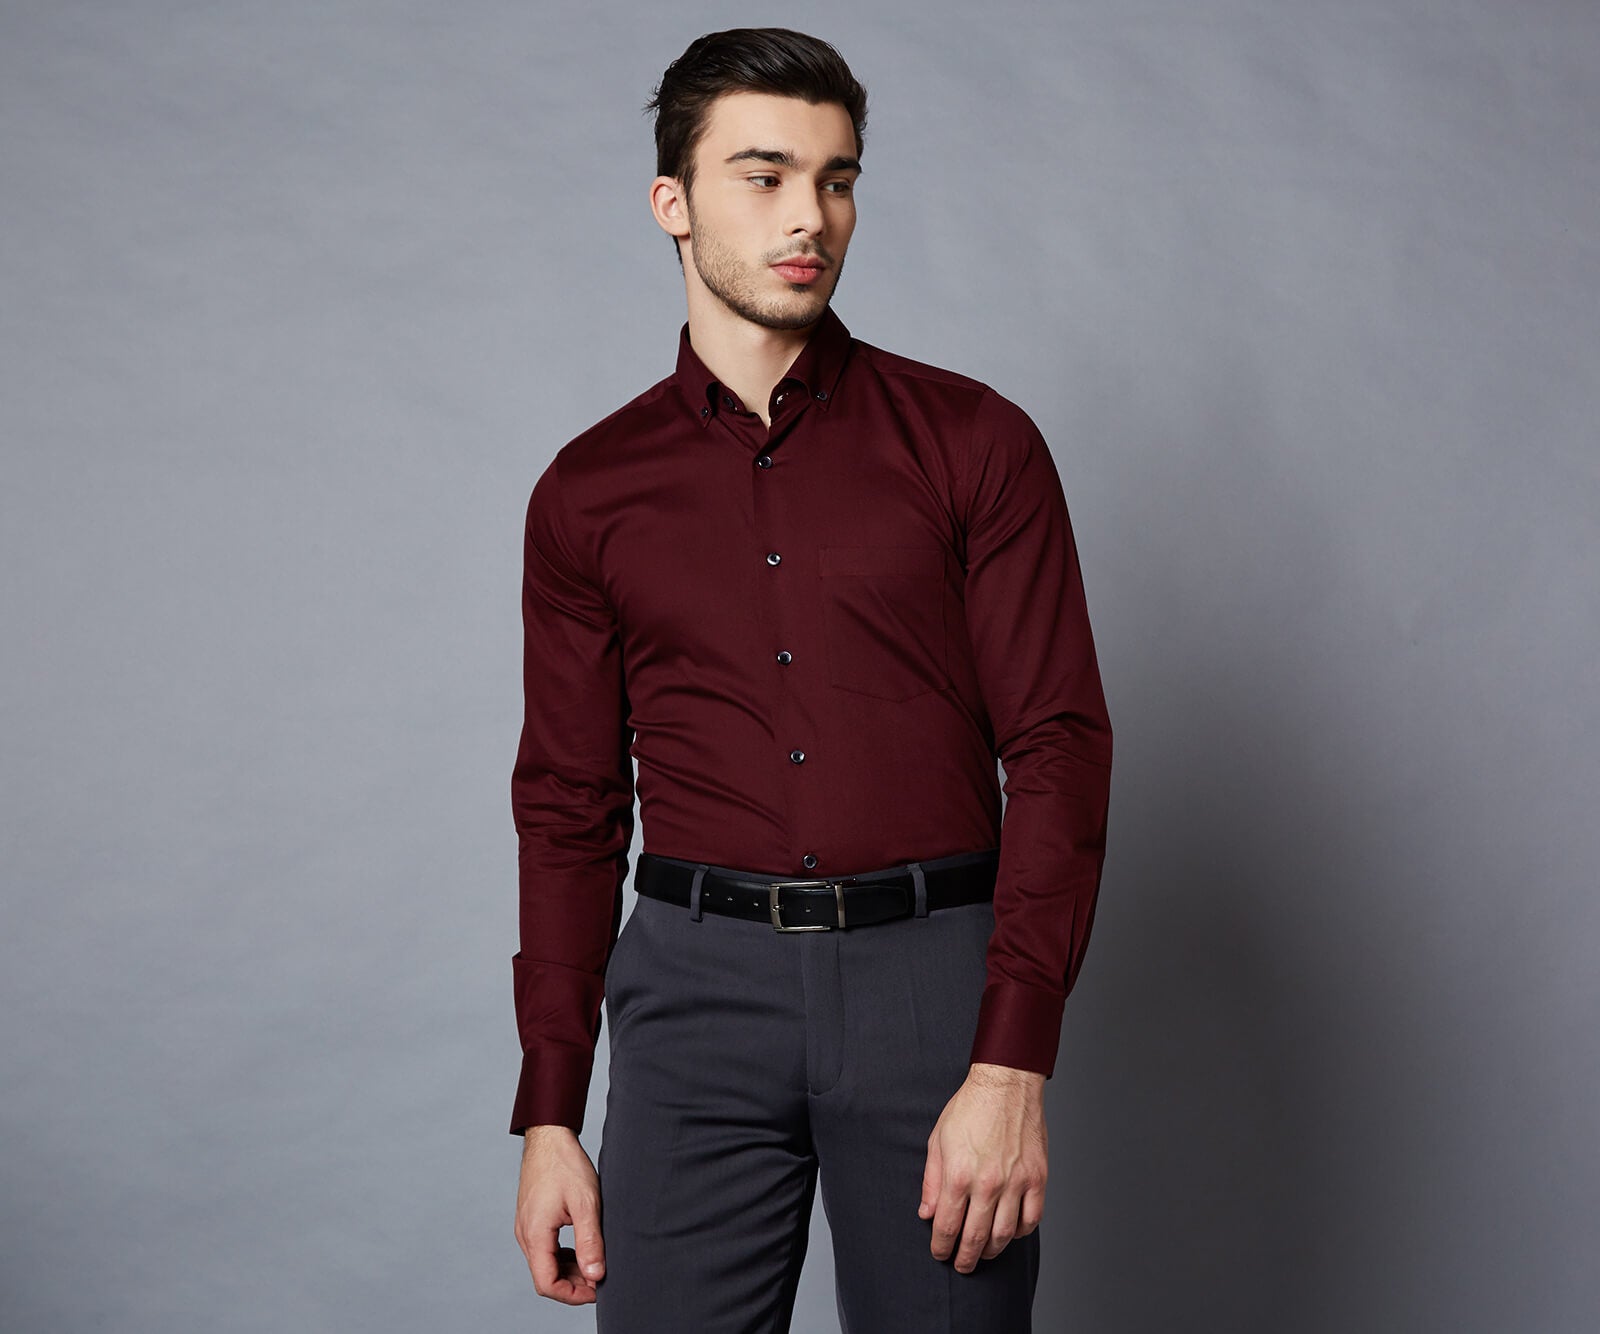 Grey Dress Pants with Burgundy Shirt Outfits For Men (15 ideas & outfits) |  Lookastic